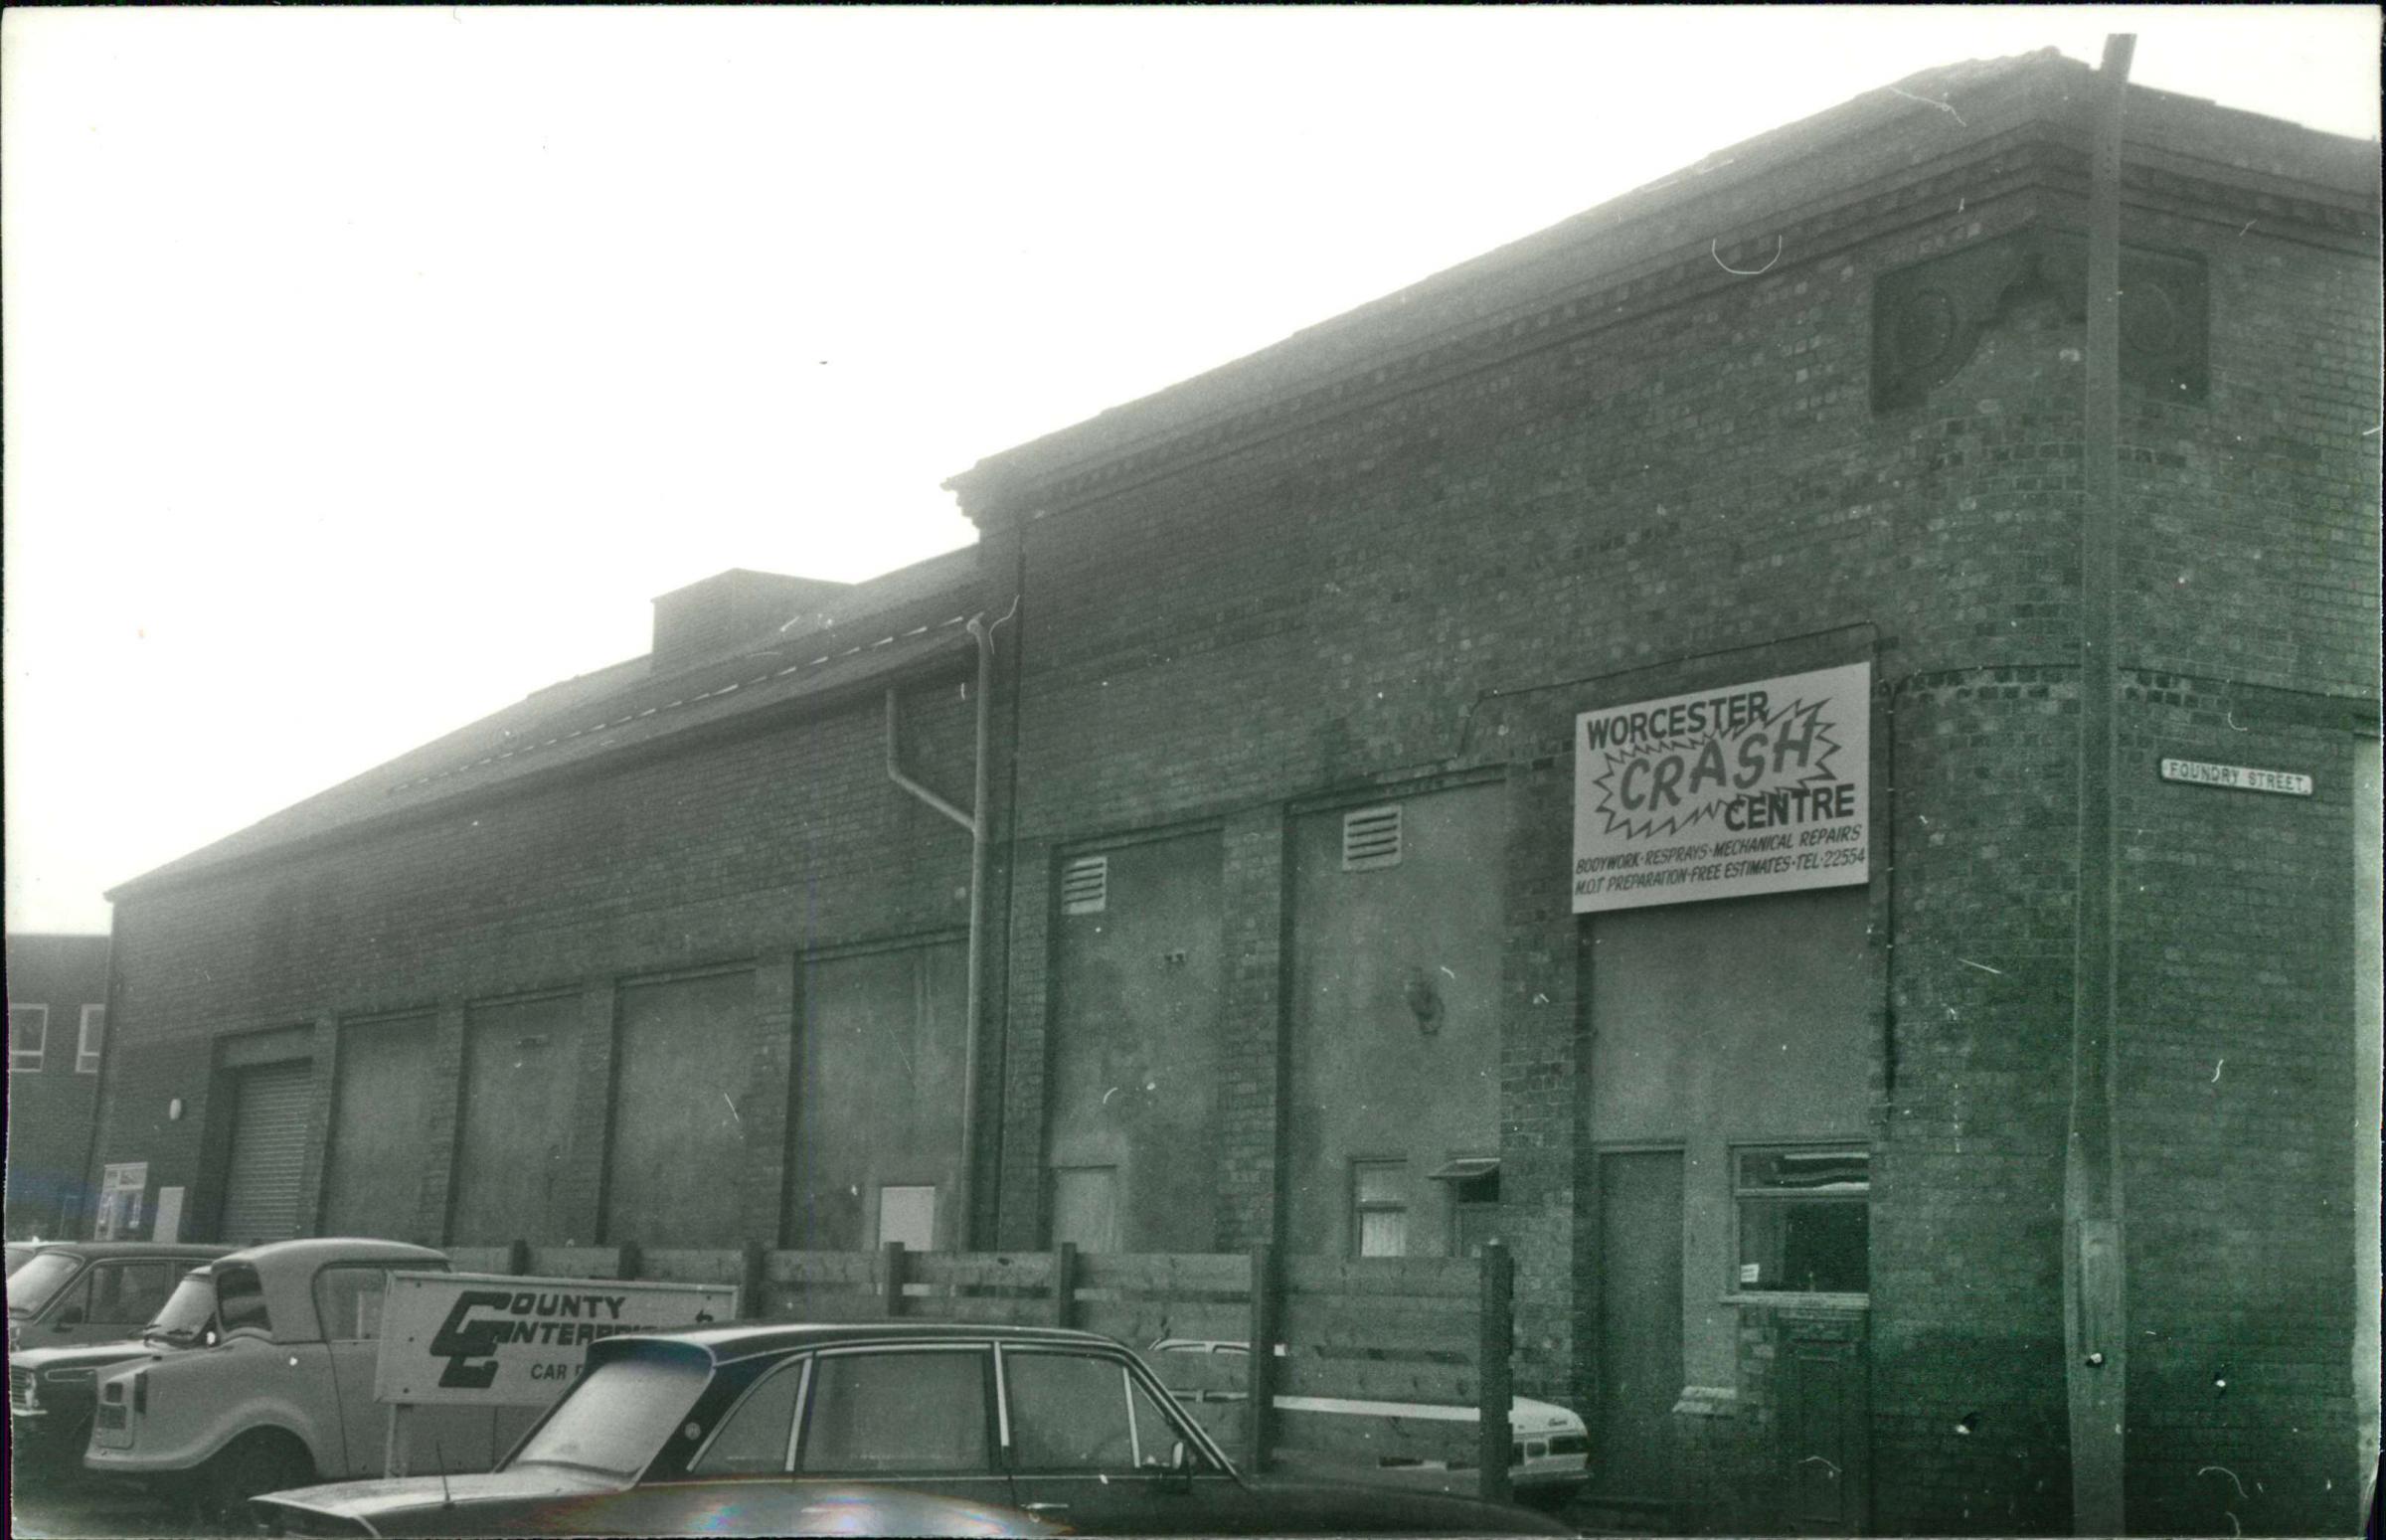 The remaining foundry buildings in the 1970s. These buildings still stand on Foundry Street today